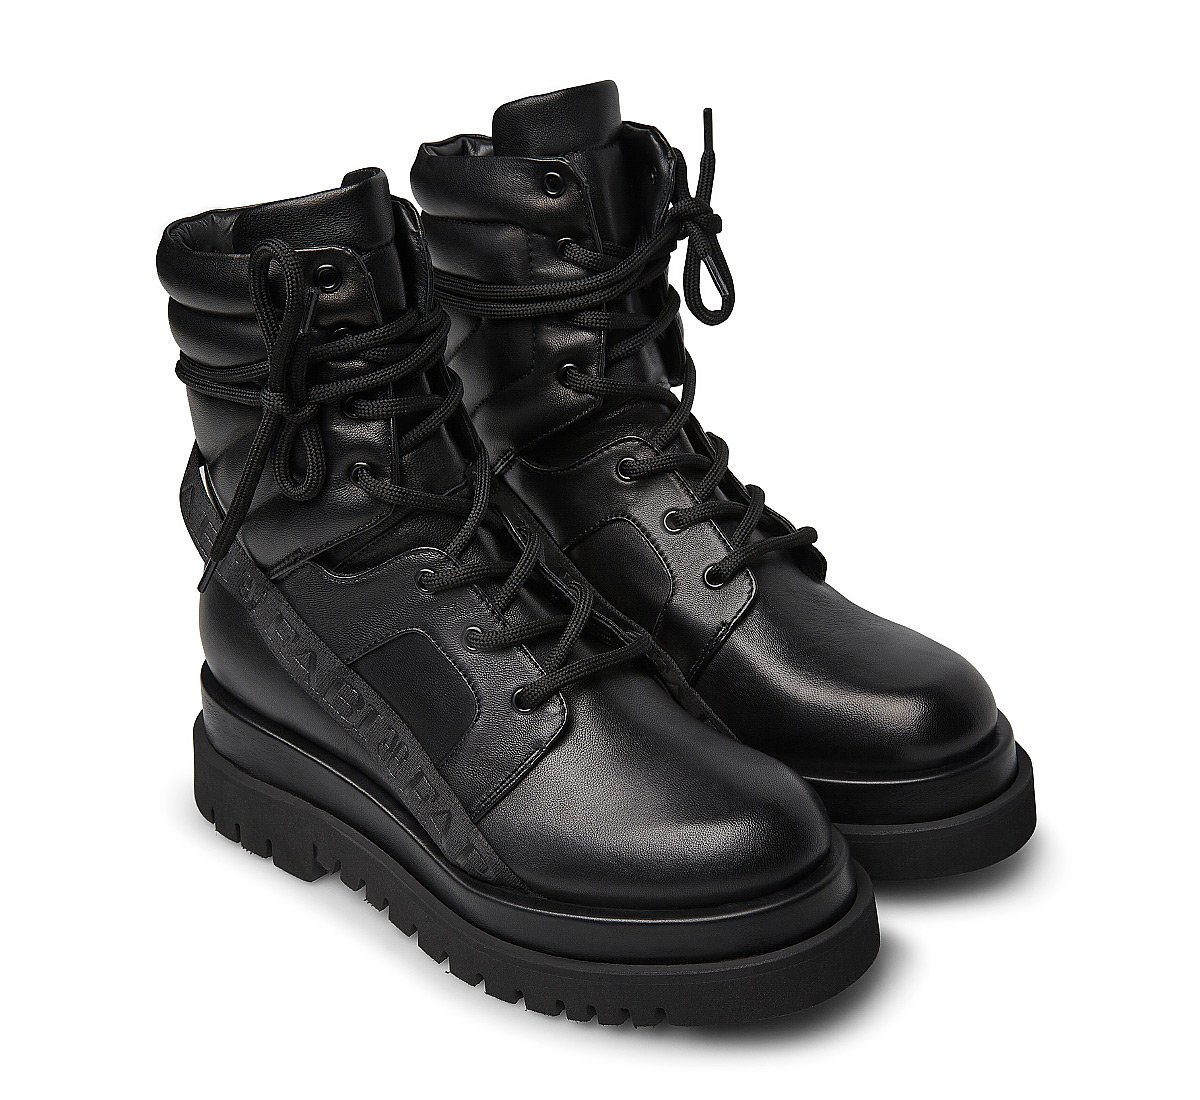 Boot in nappa leather